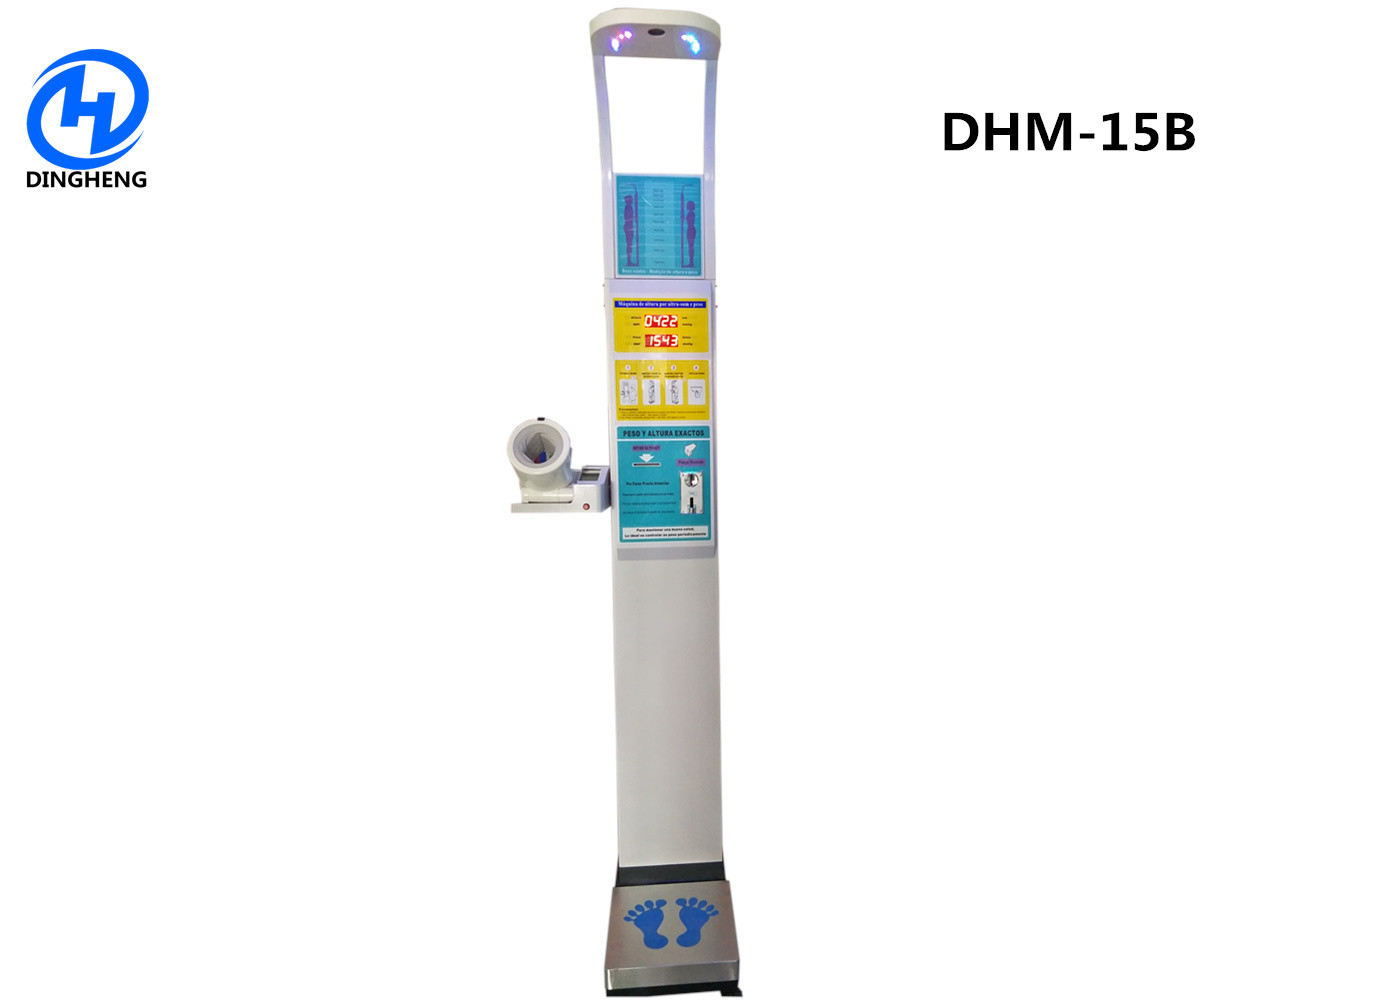  DHM-15B Coin operated height weight scale with blood pressure and BMI calculate Manufactures